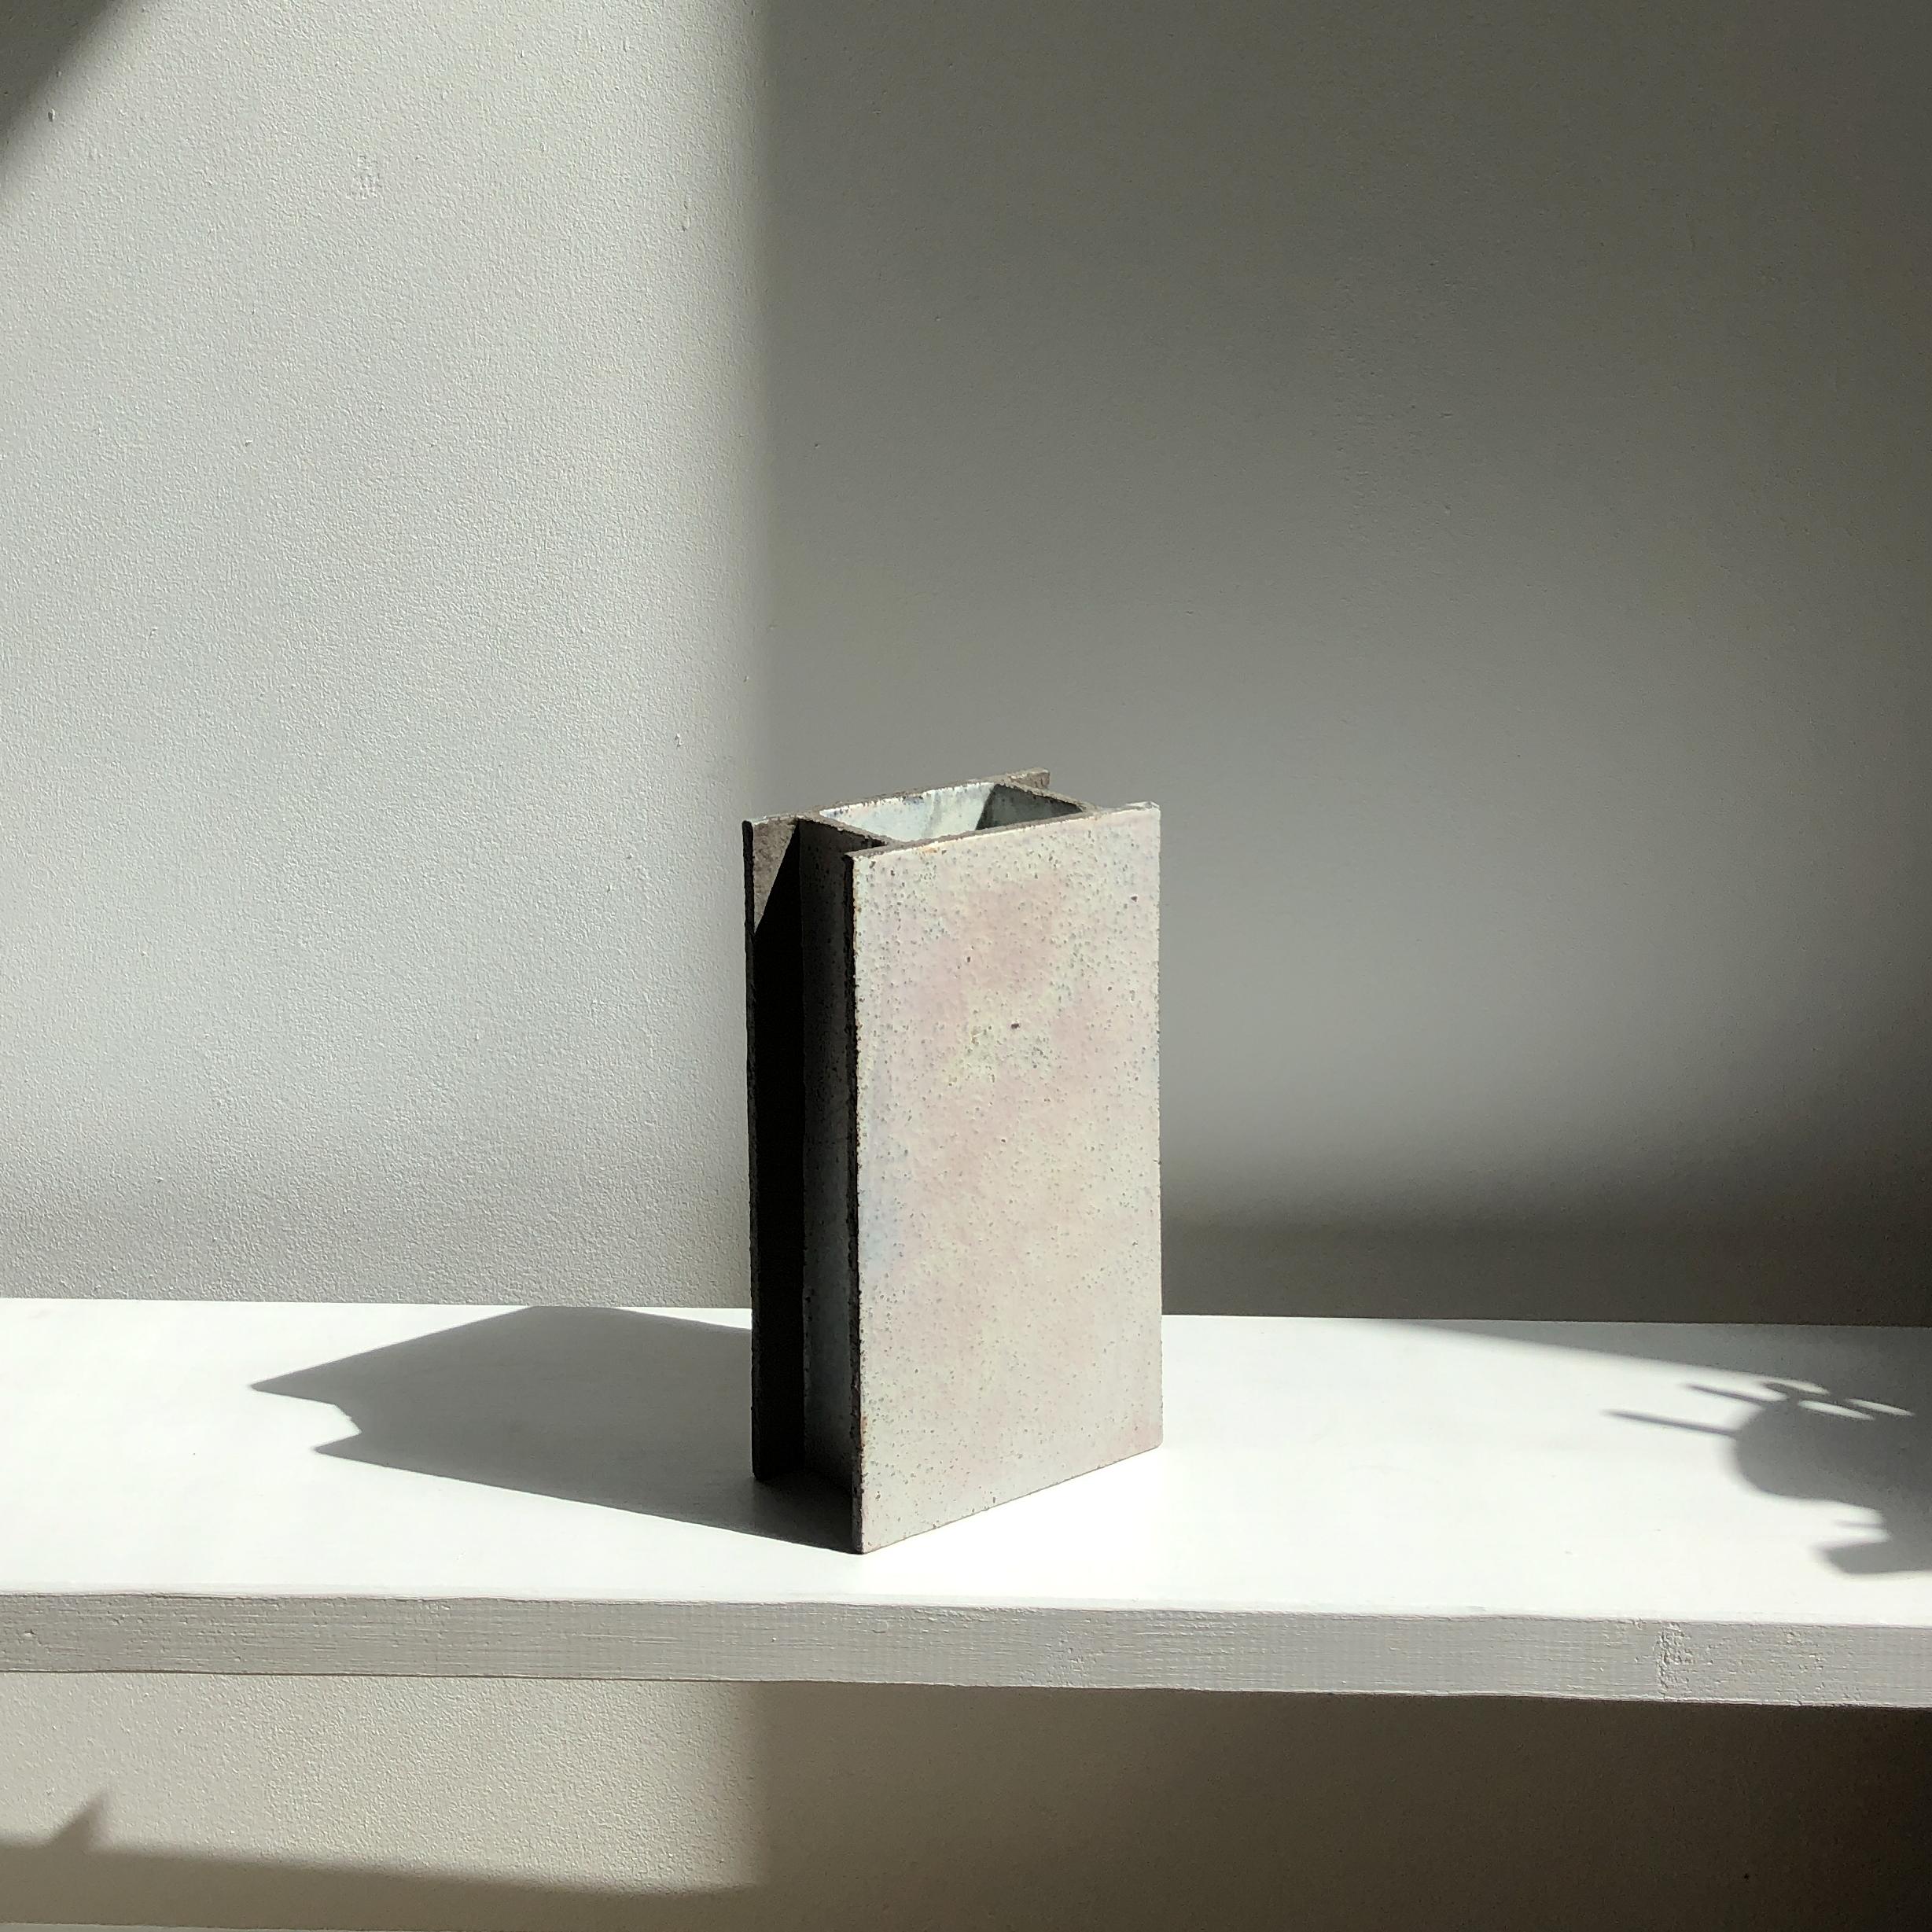 H Vase by Wendy Taylor
Dimensions: D12 x W6.5 x H21.8 cm
Materials: stoneware

Stoneware, matt glazed. Glaze colour/ surface pattern will vary.

Wendy Taylor's clay slab constructed works are influenced by elements of the built environment,